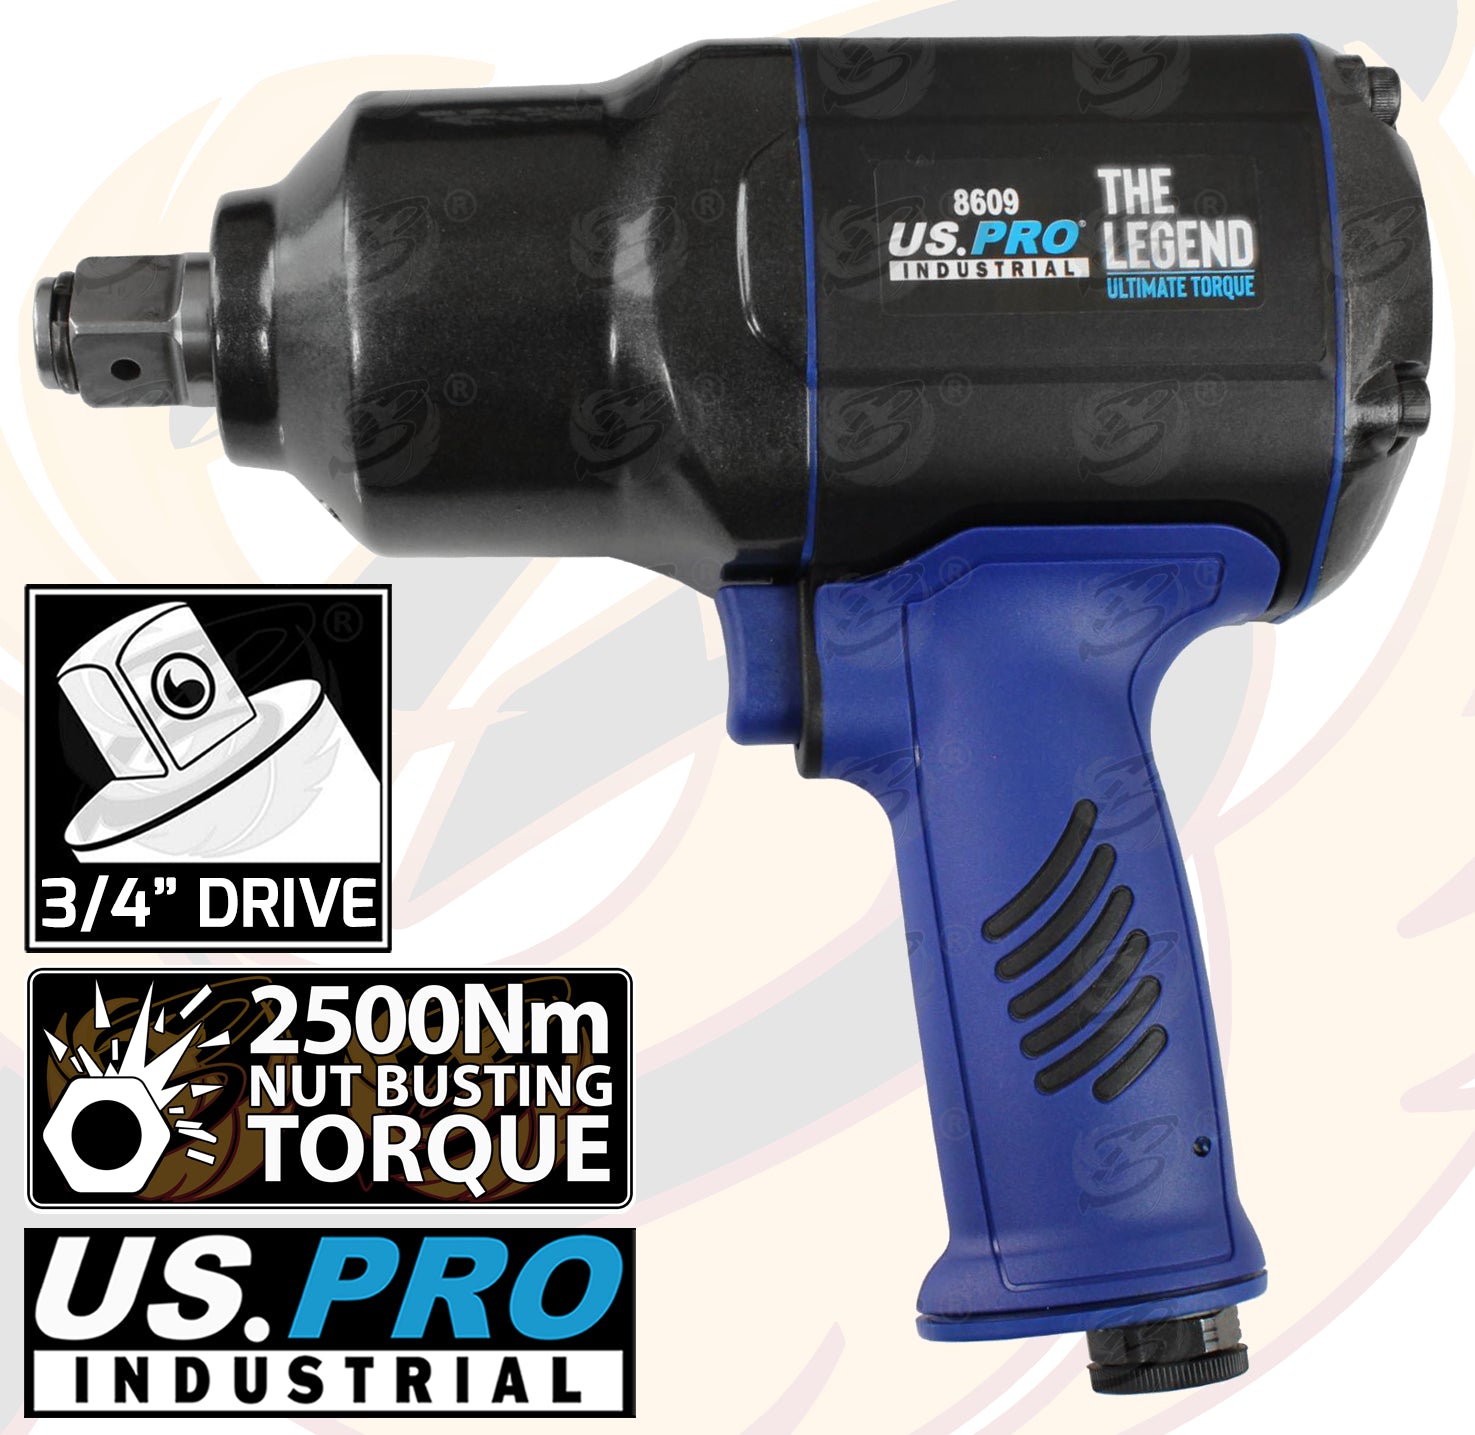 US PRO 3/4" DRIVE AIR IMPACT WRENCH 2500Nm ( THE LEGEND ) & 17MM - 19MM - 21MM DEEP IMPACT SOCKETS